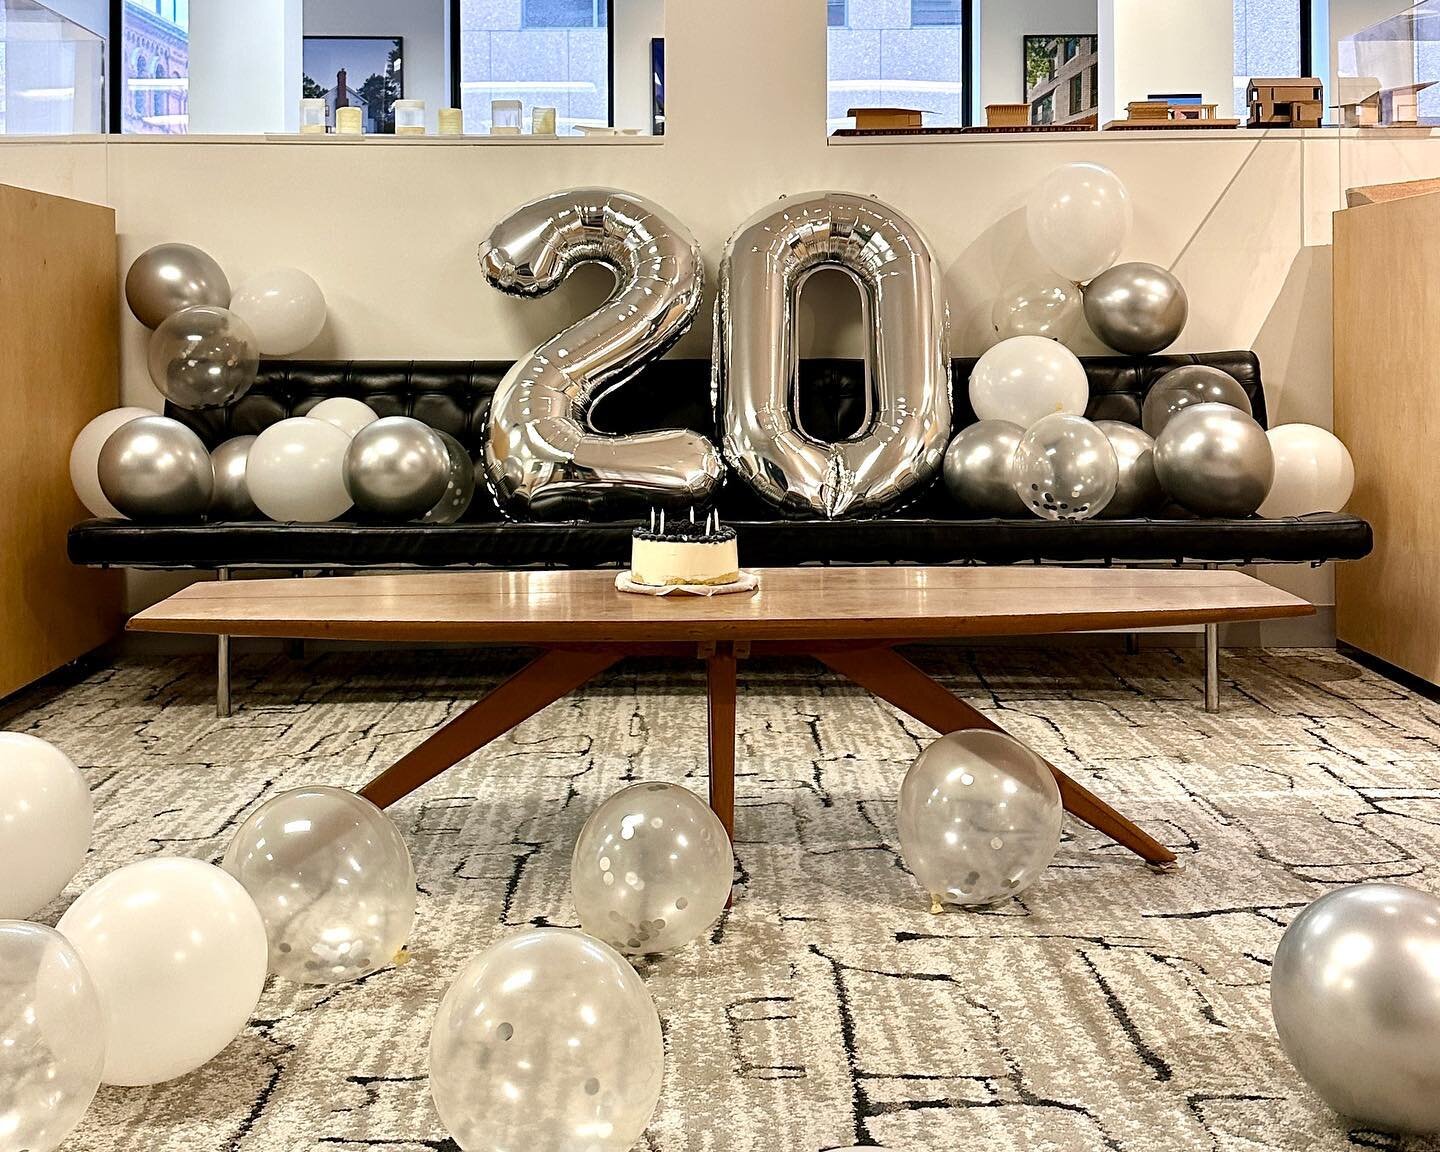 Celebrating 20 amazing years of Touloukian Touloukian Inc! The TT team surprised Ted with some well-deserved balloons and cheesecake to mark the milestone. Wishing everyone a happy Thanksgiving!